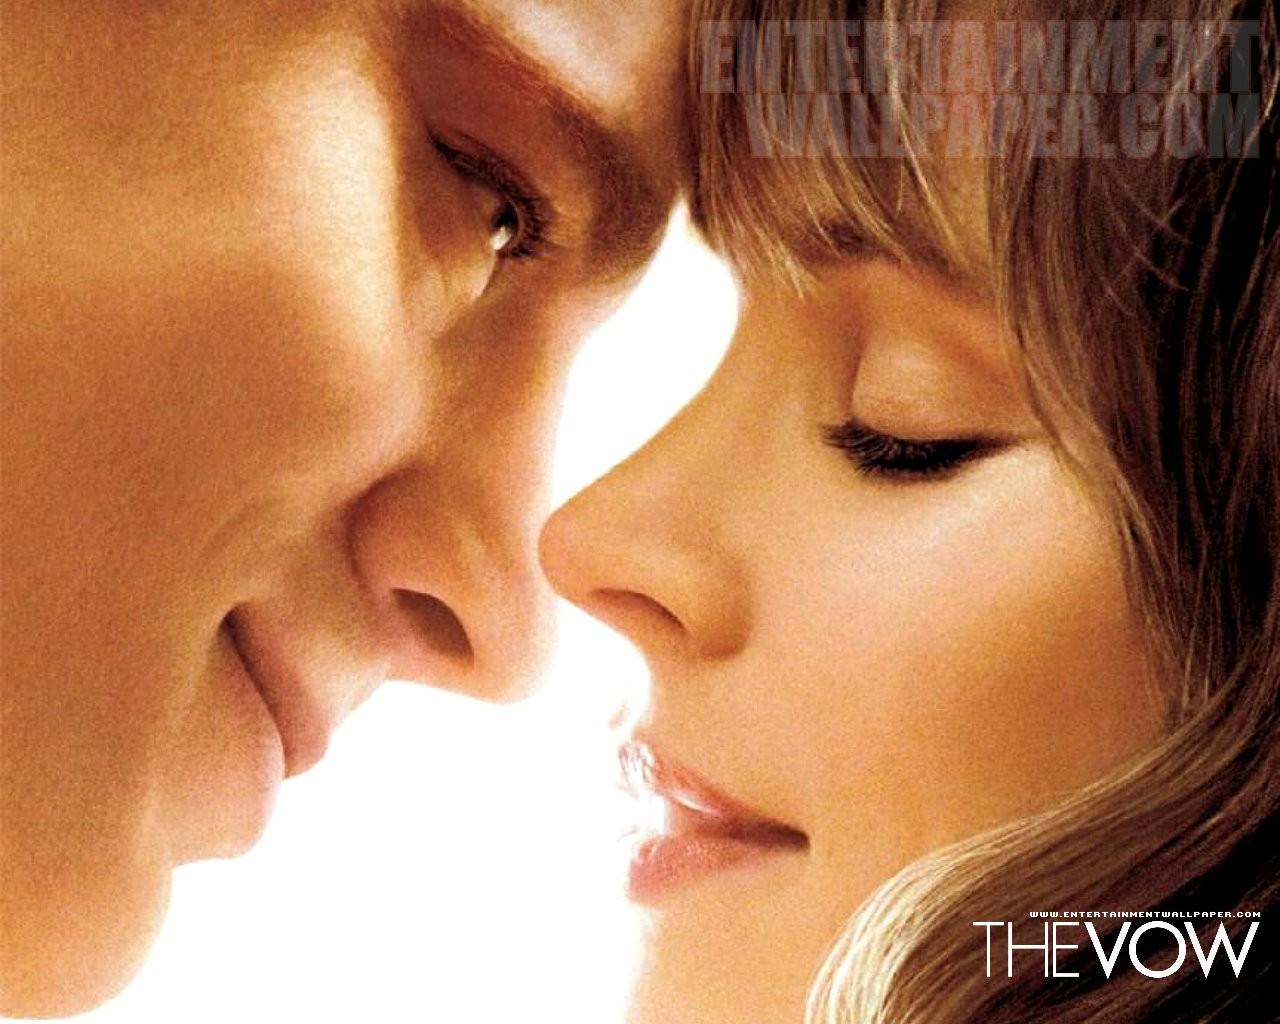 The Vow Wallpaper. The Vow Wallpaper